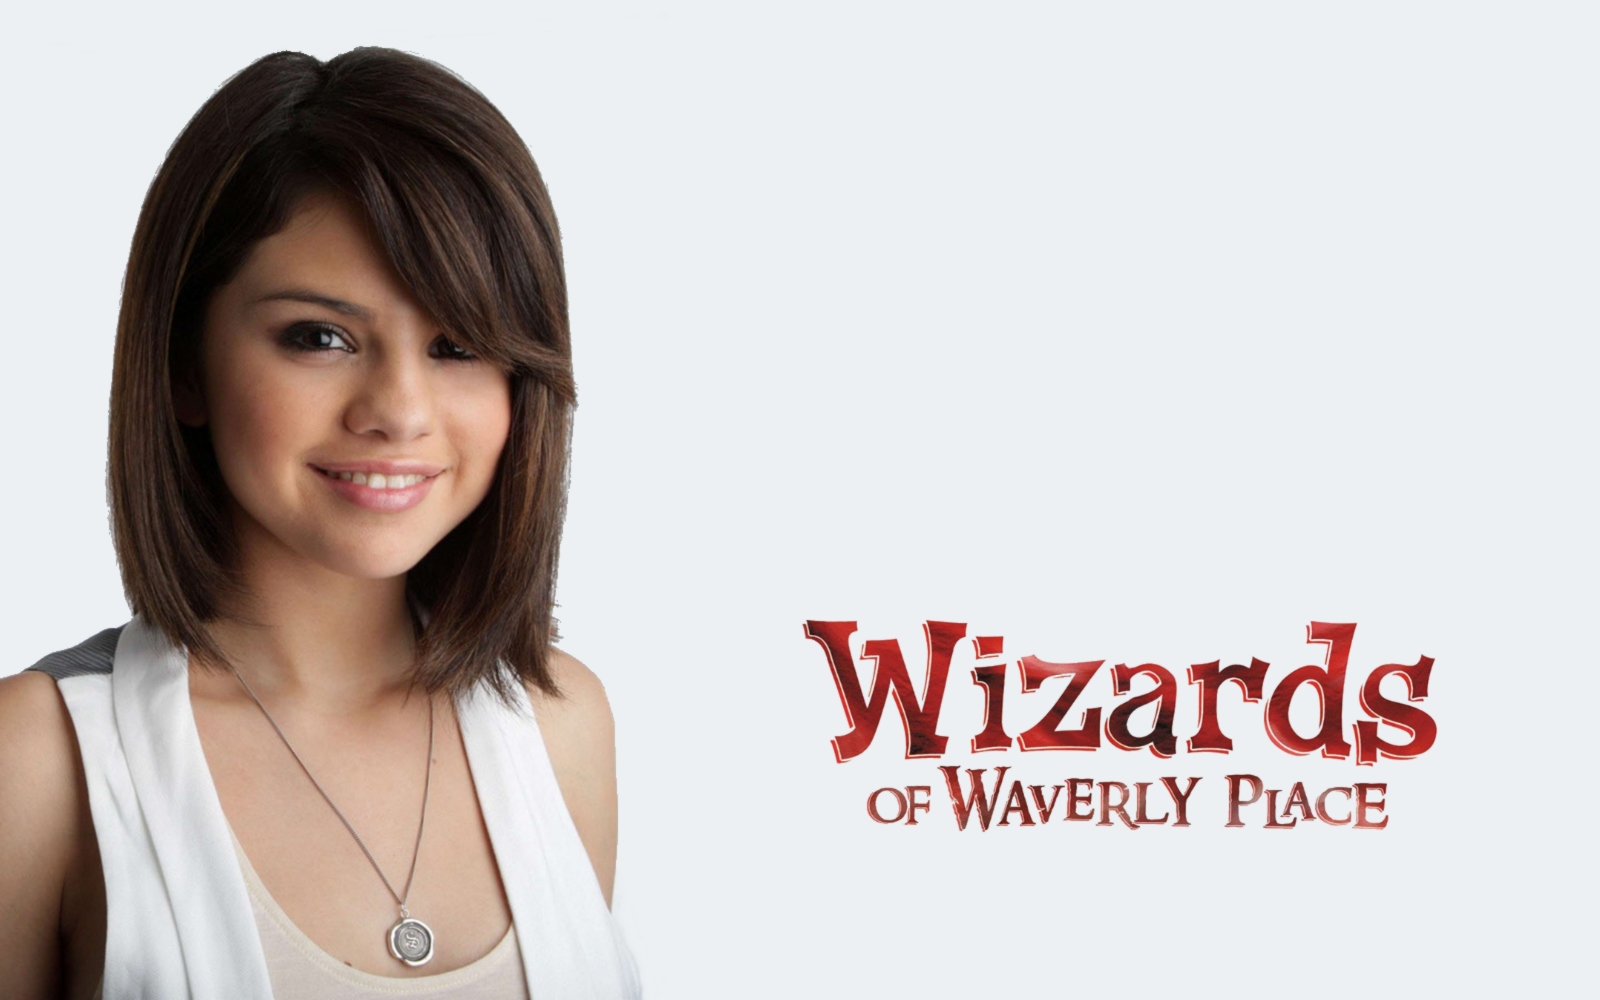 Wizards of Waverly Place 2007-2011.